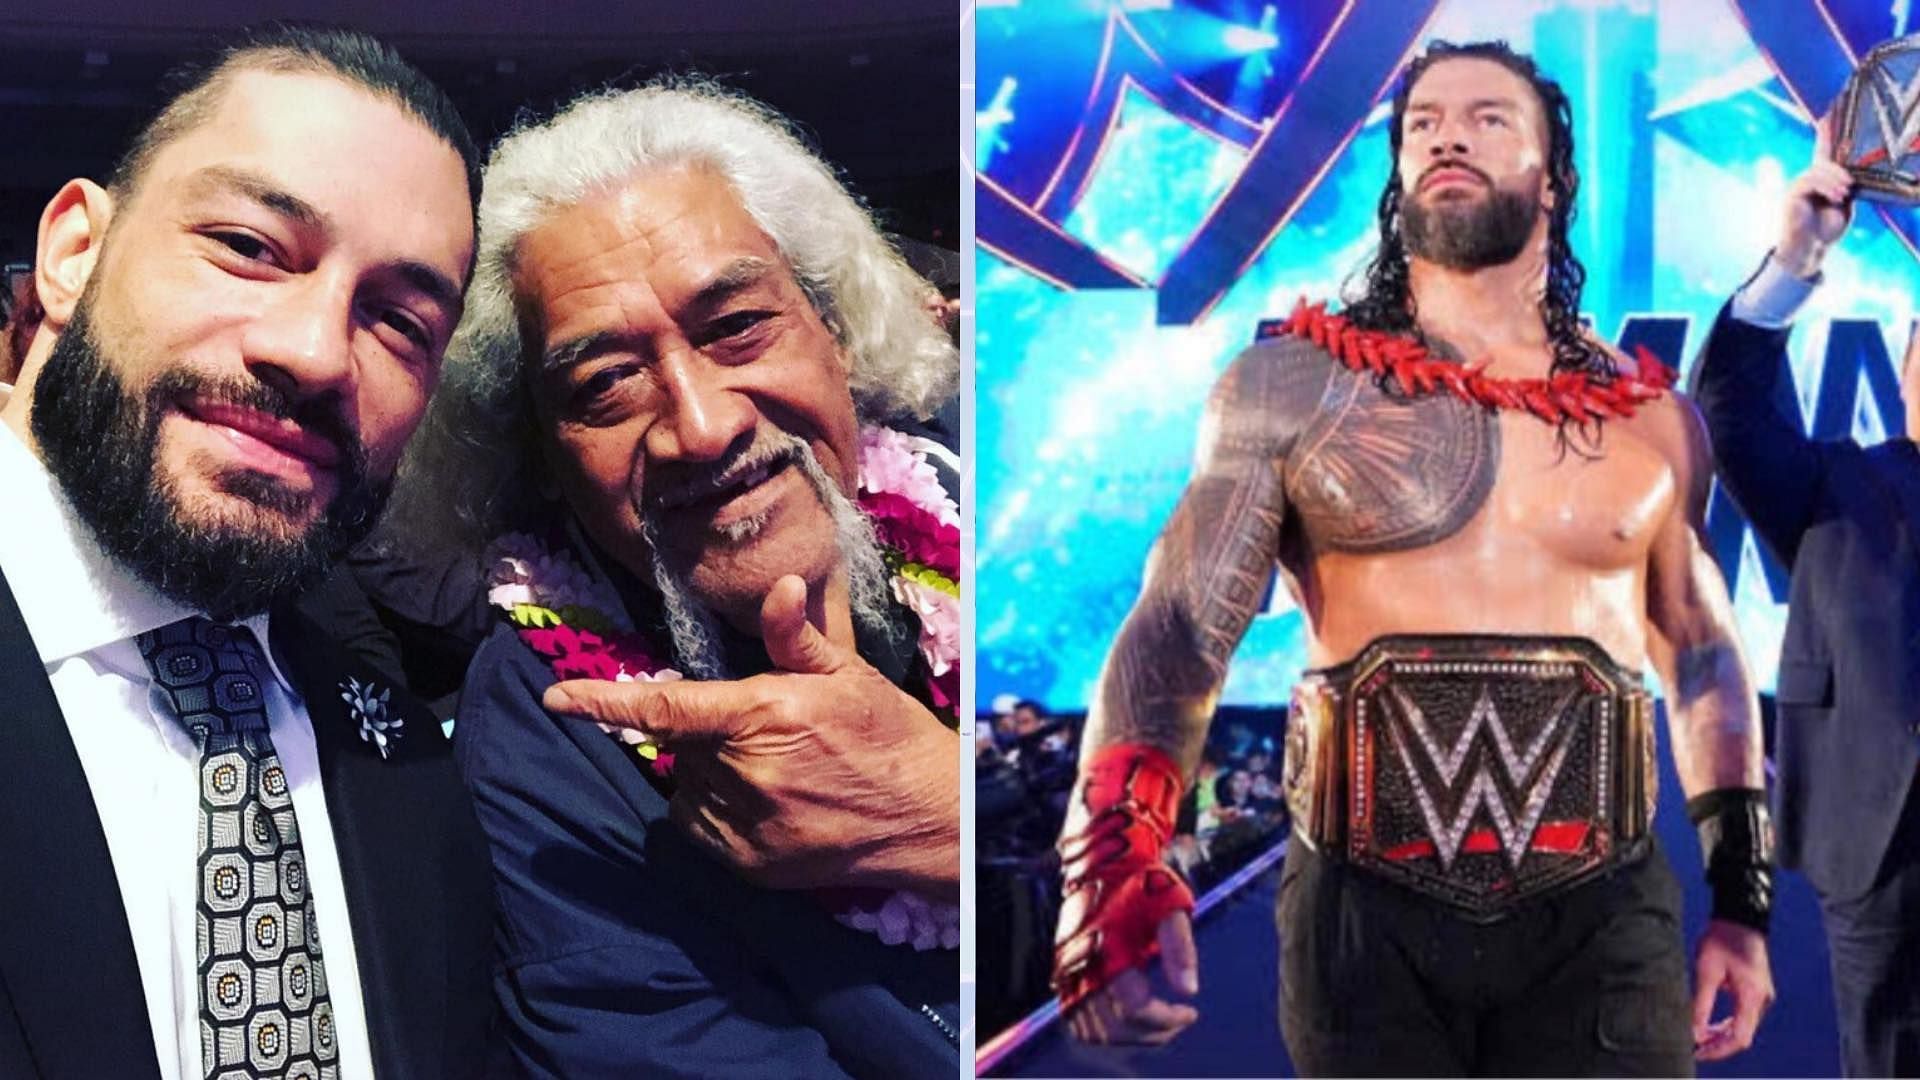 Roman Reigns was given some valuable advice from his father Sika Anoa